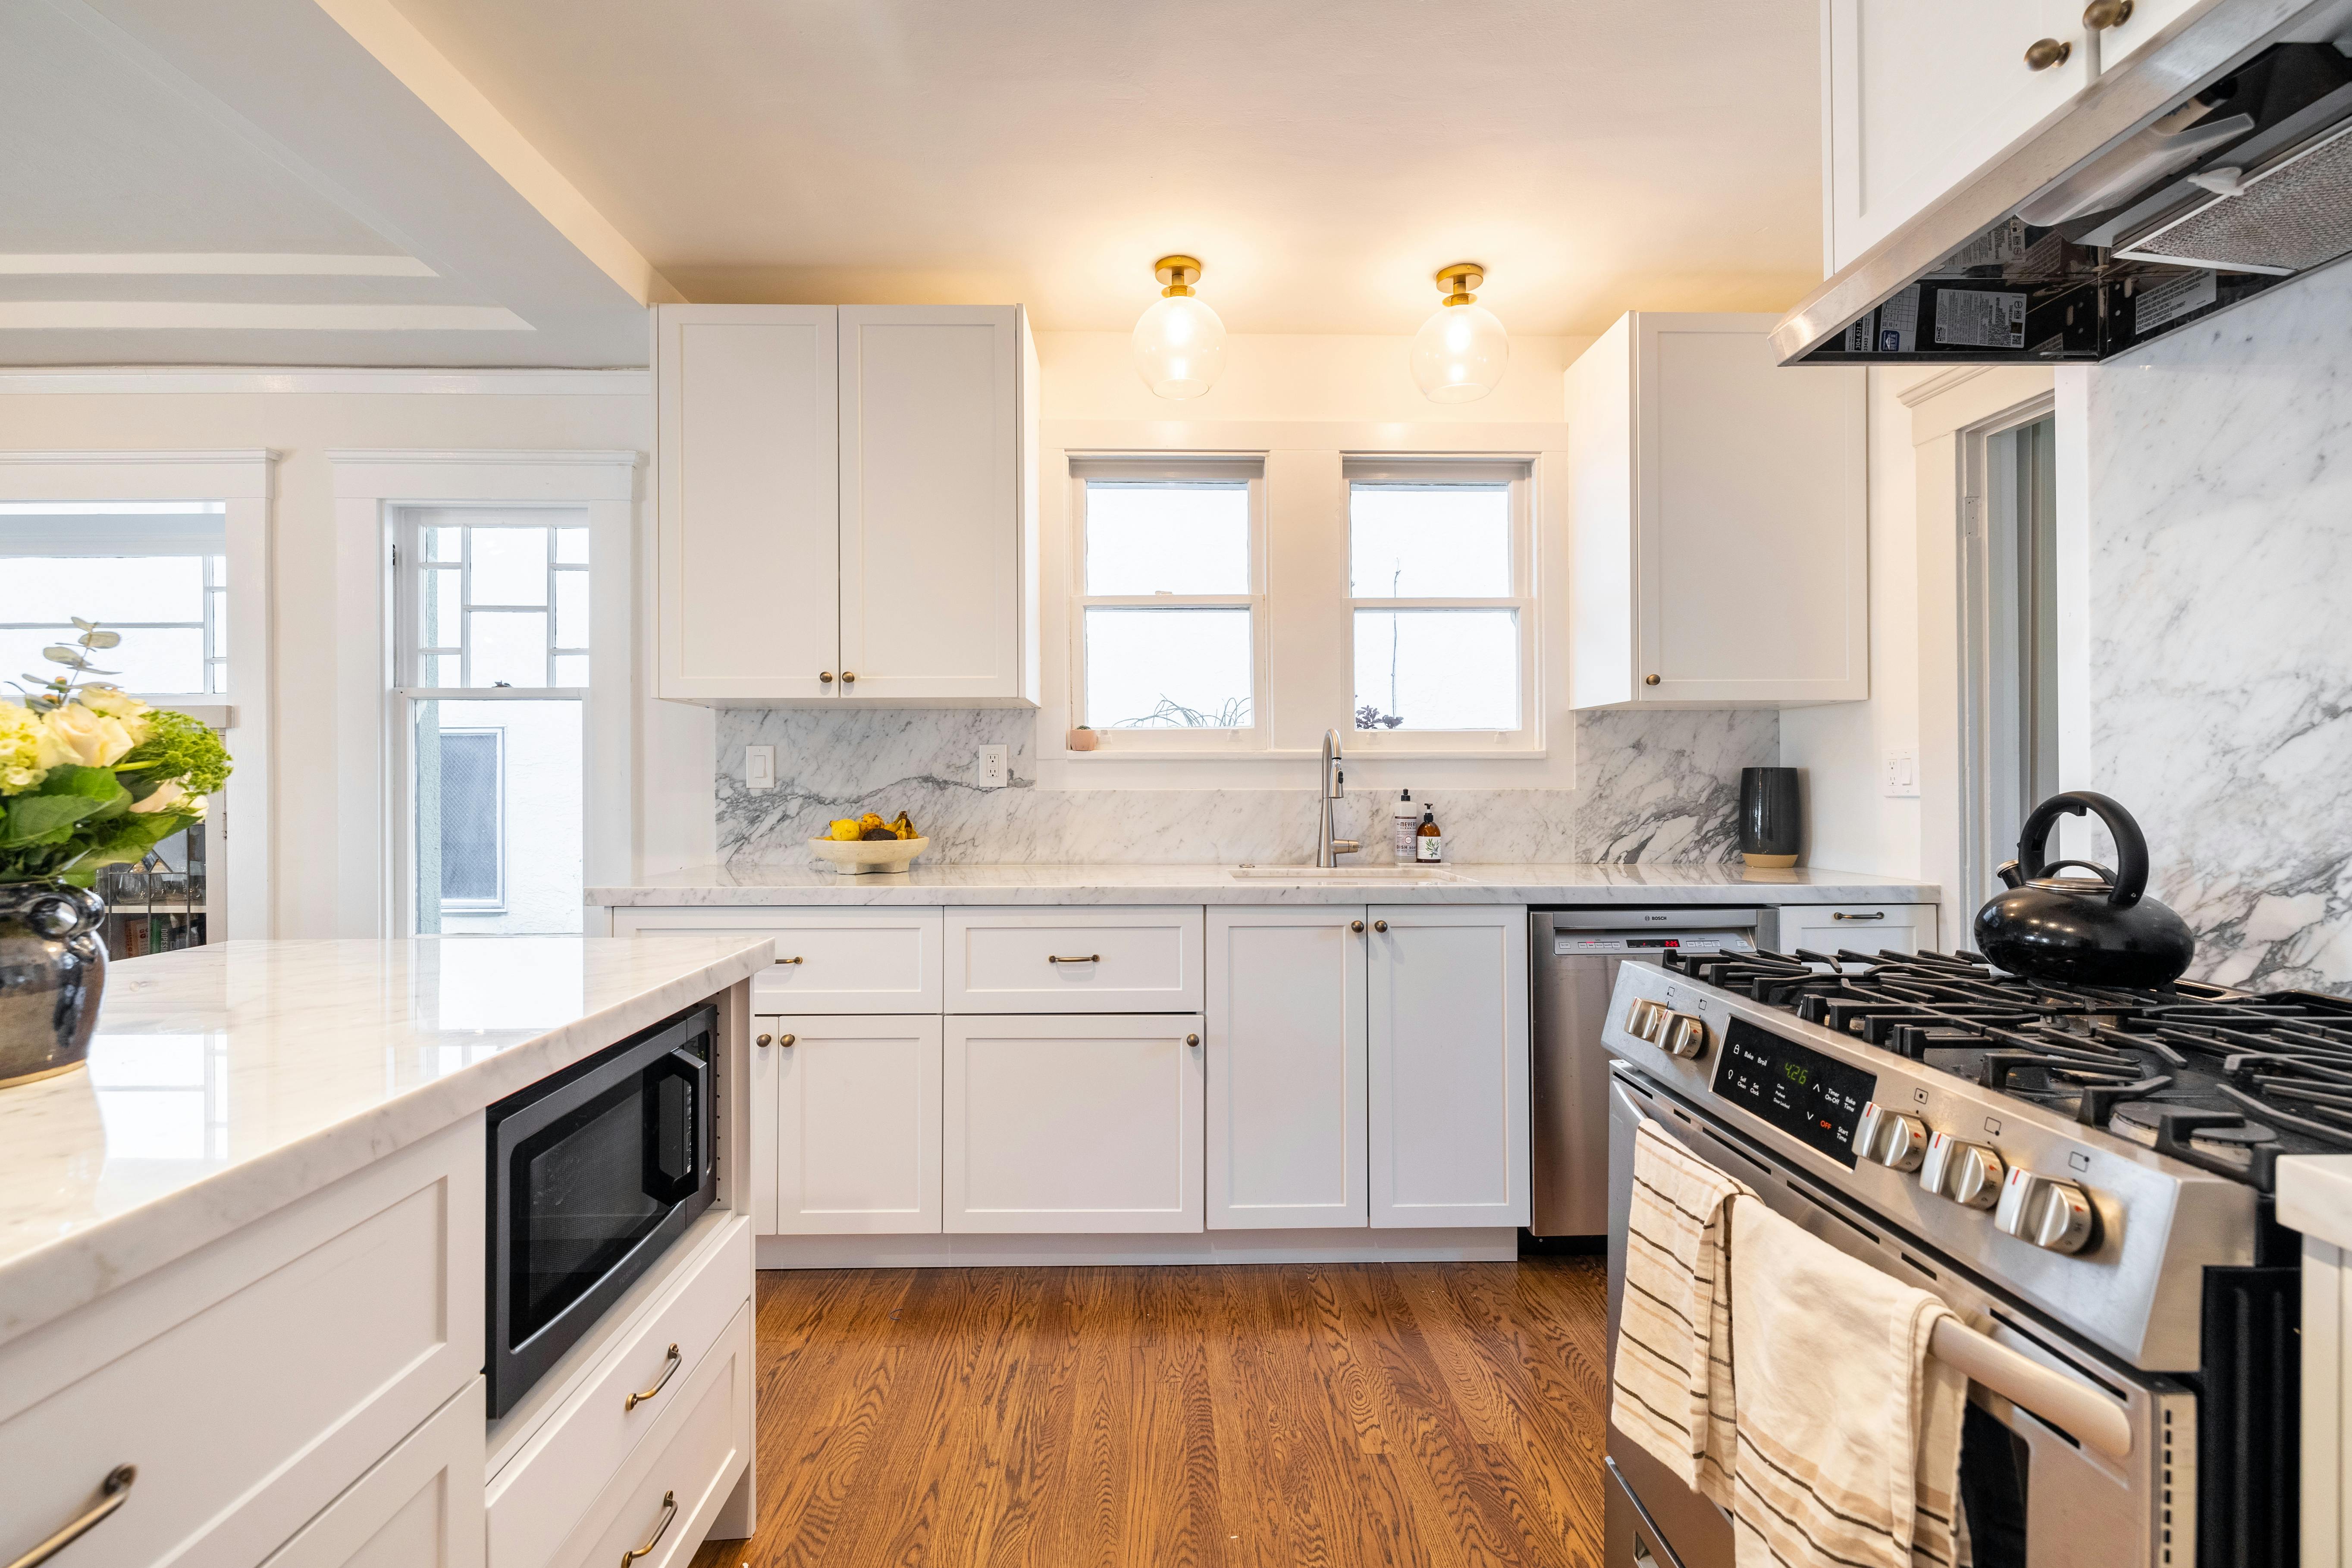 How much does it cost to renovate your kitchen? Kitchen renovation